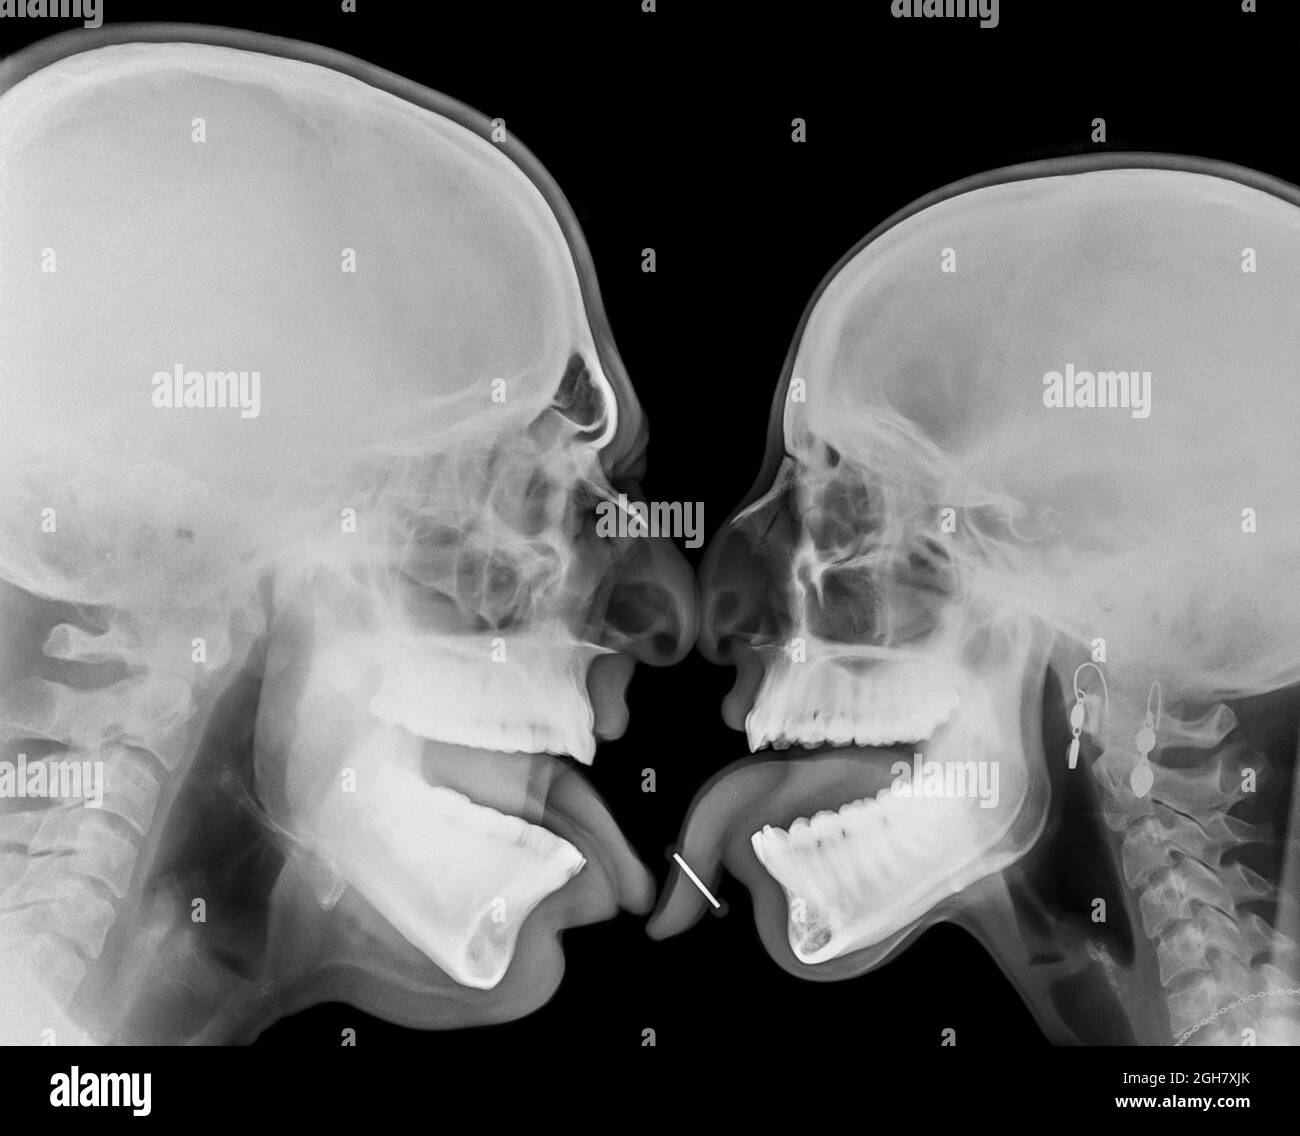 Kissing Couple. Two people kissing under x-ray pierced tongue can be seen Stock Photo